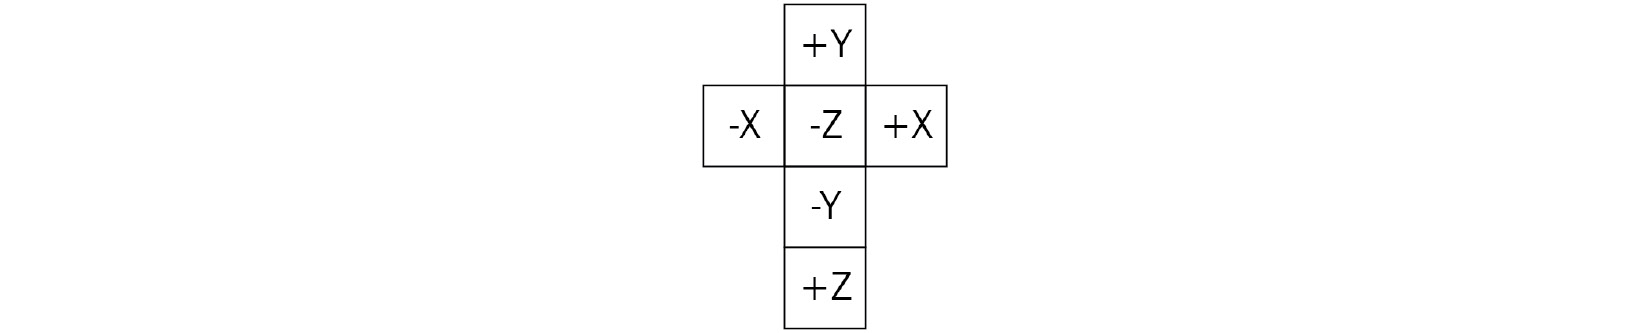 Figure 3.4 – Layout of the vertical cross image